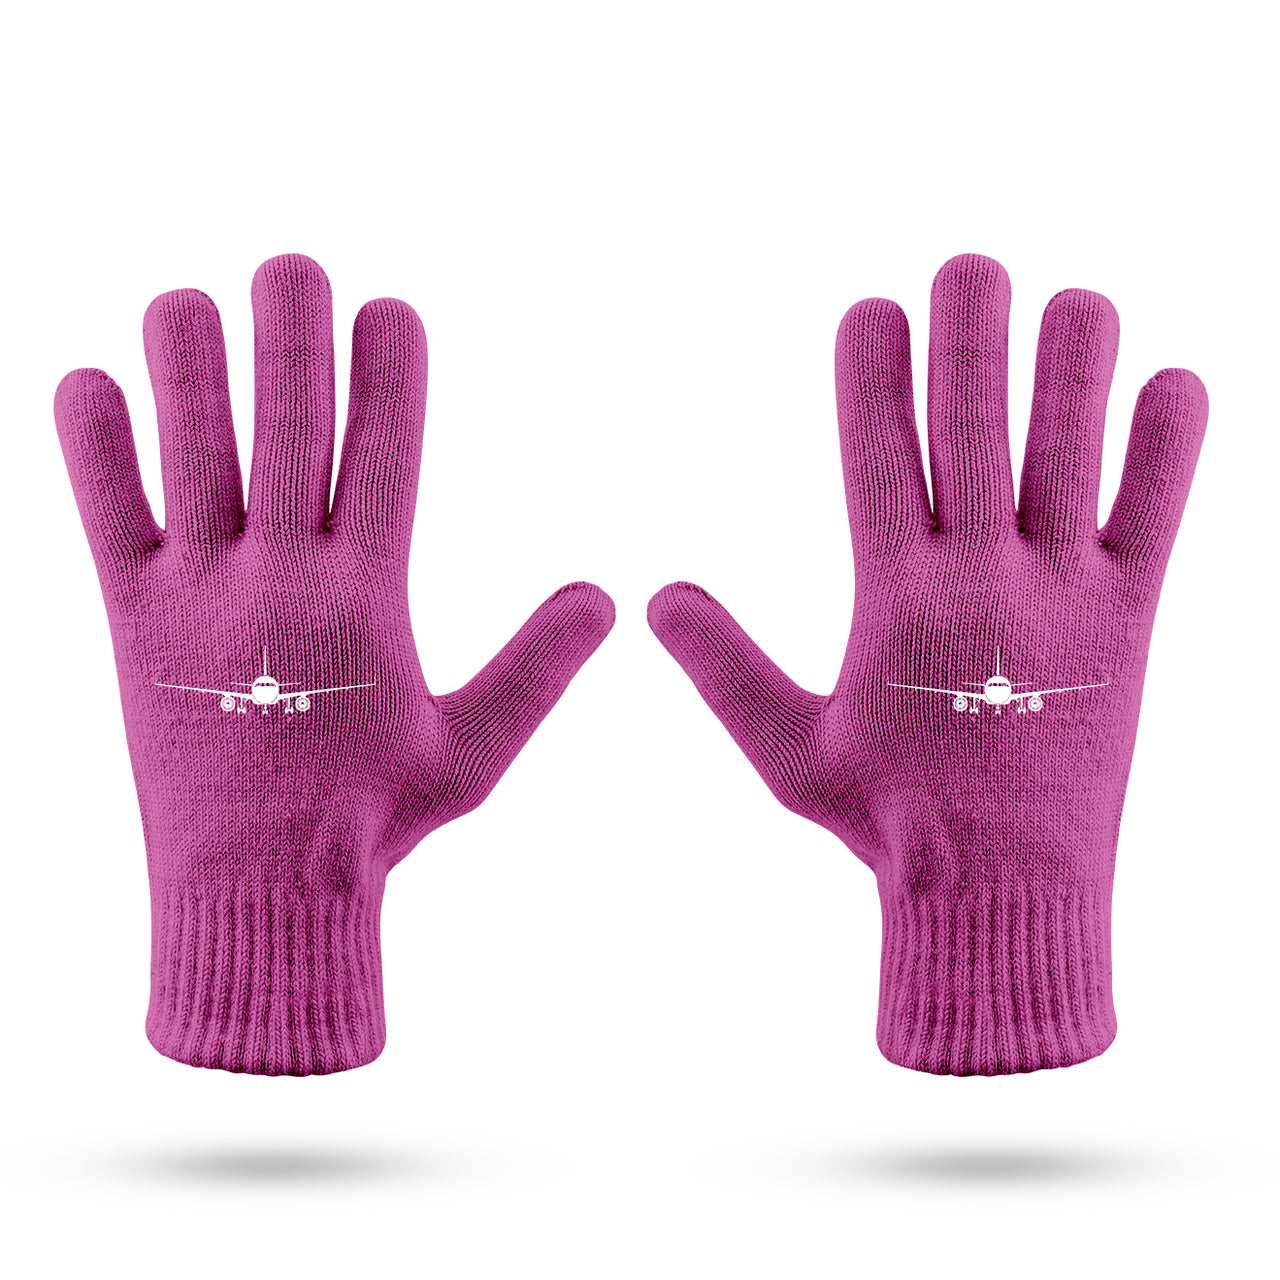 Airbus A320 Silhouette Designed Gloves